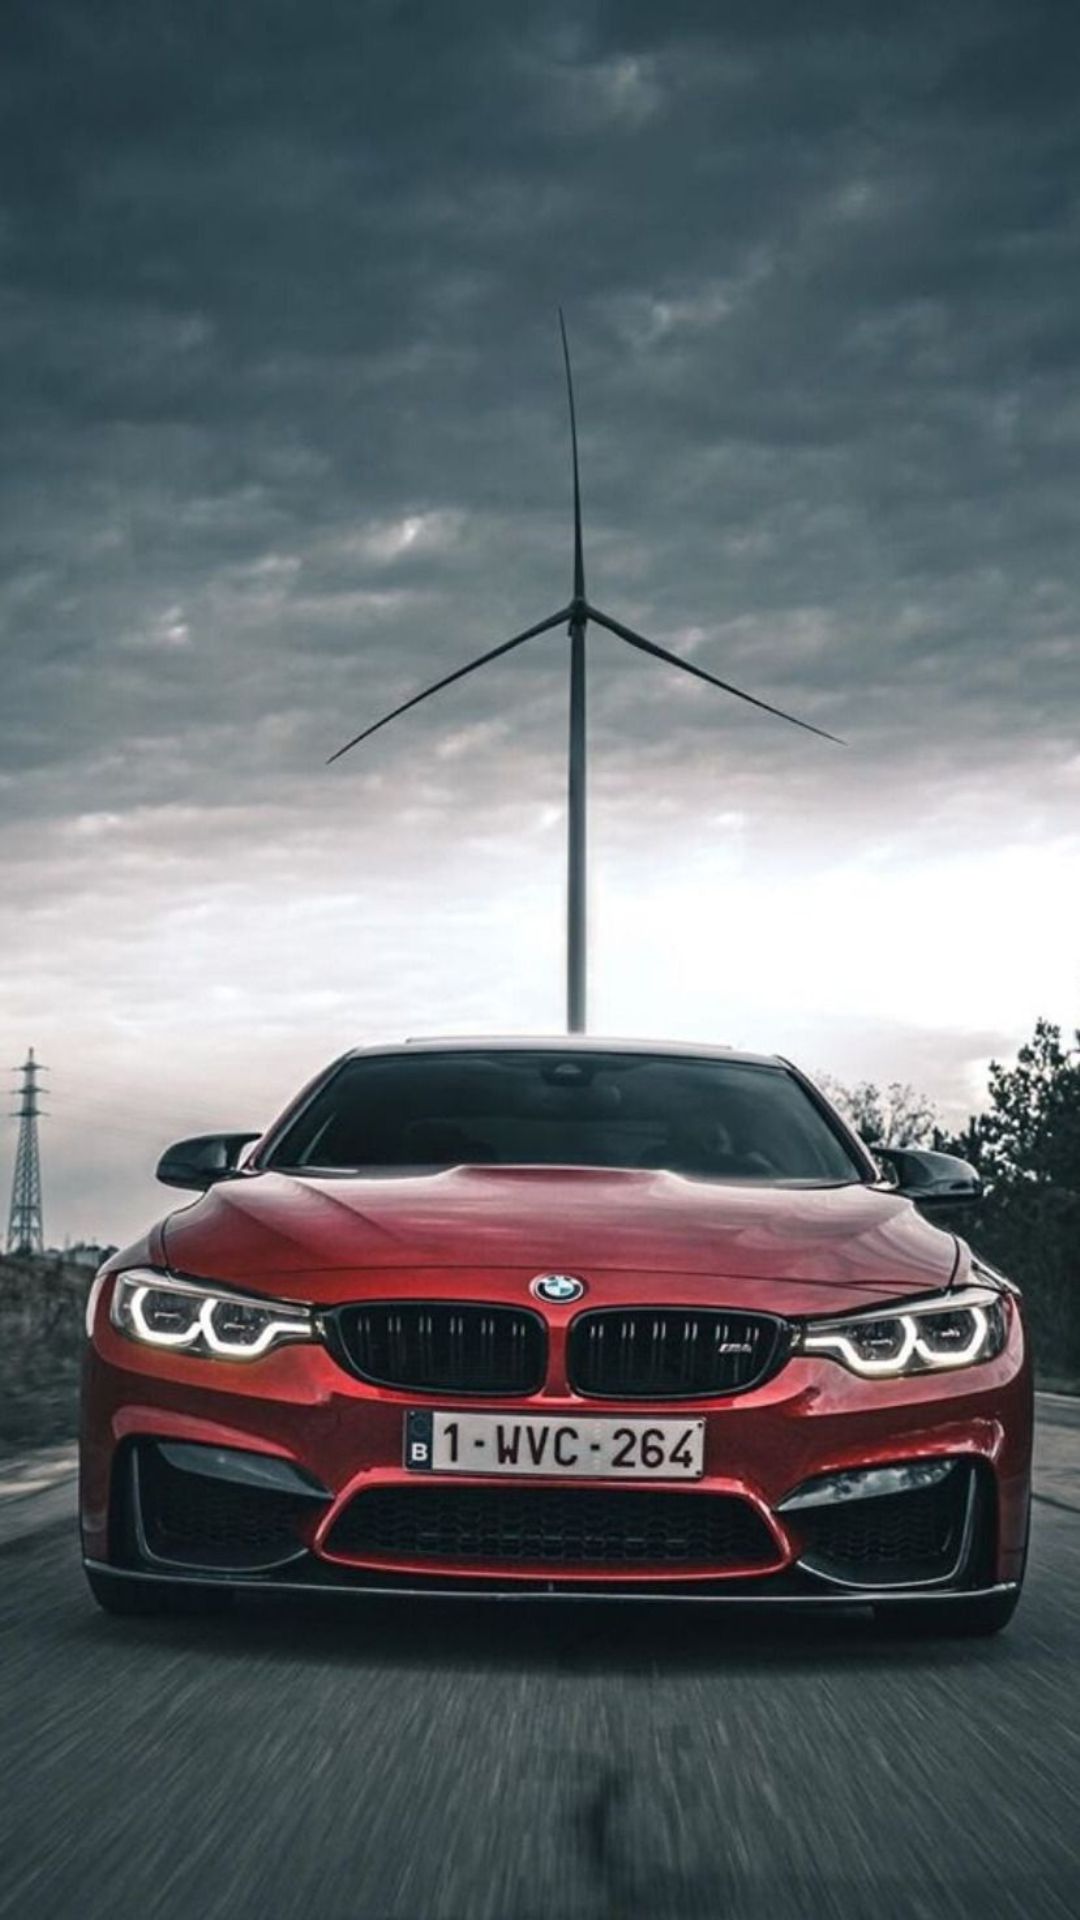 BMW M4 - Ambient City Drive - 4K Ultra HD 60fps on Make a GIF